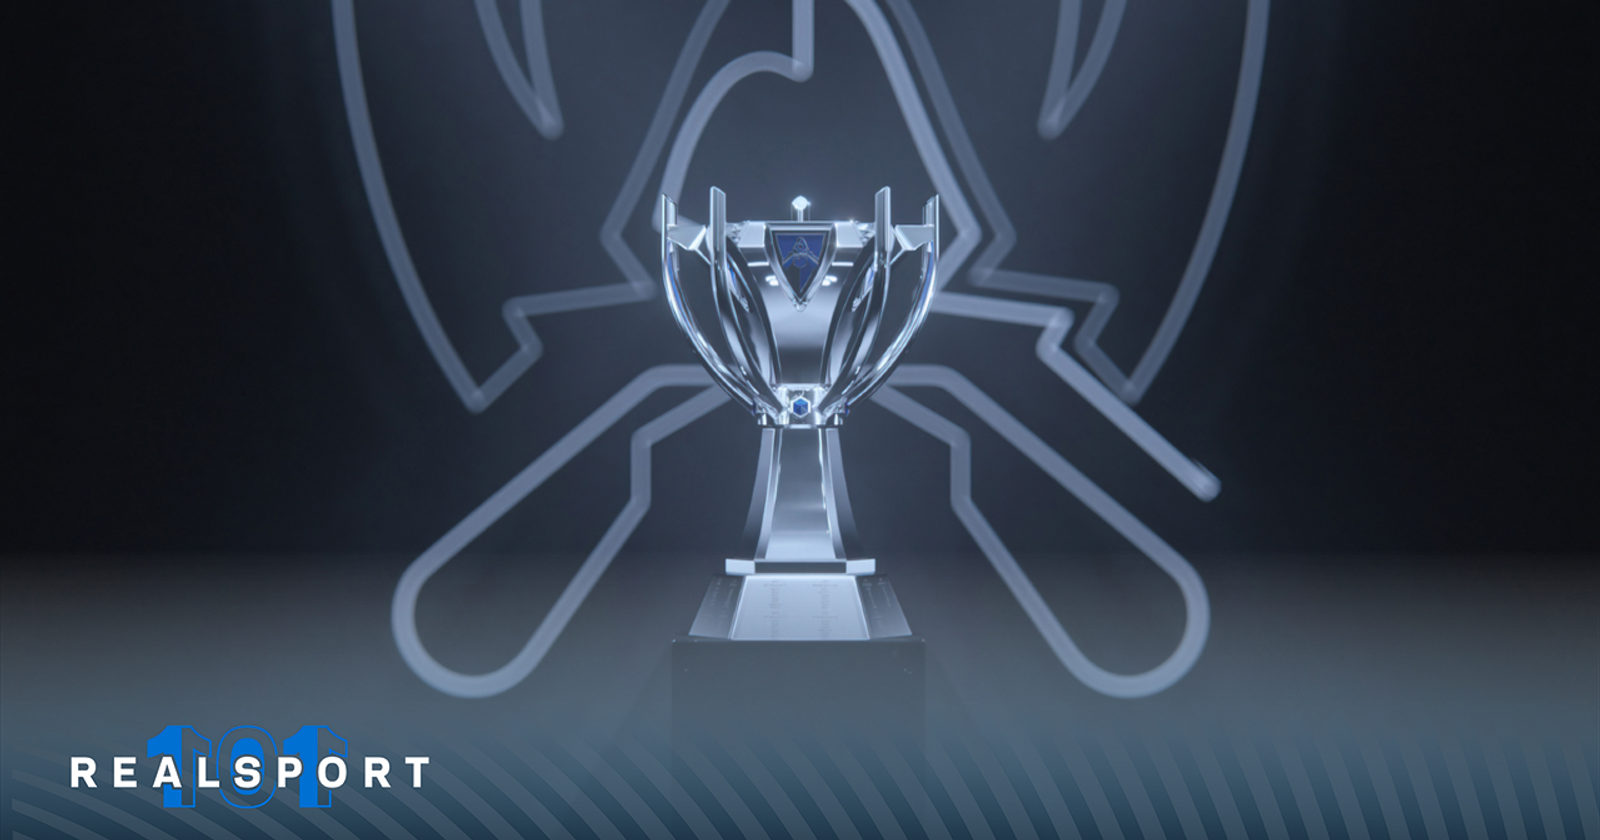 WORLDS THEME 2022: This trophy frame gets more time than all minors regions  combined : r/leagueoflegends